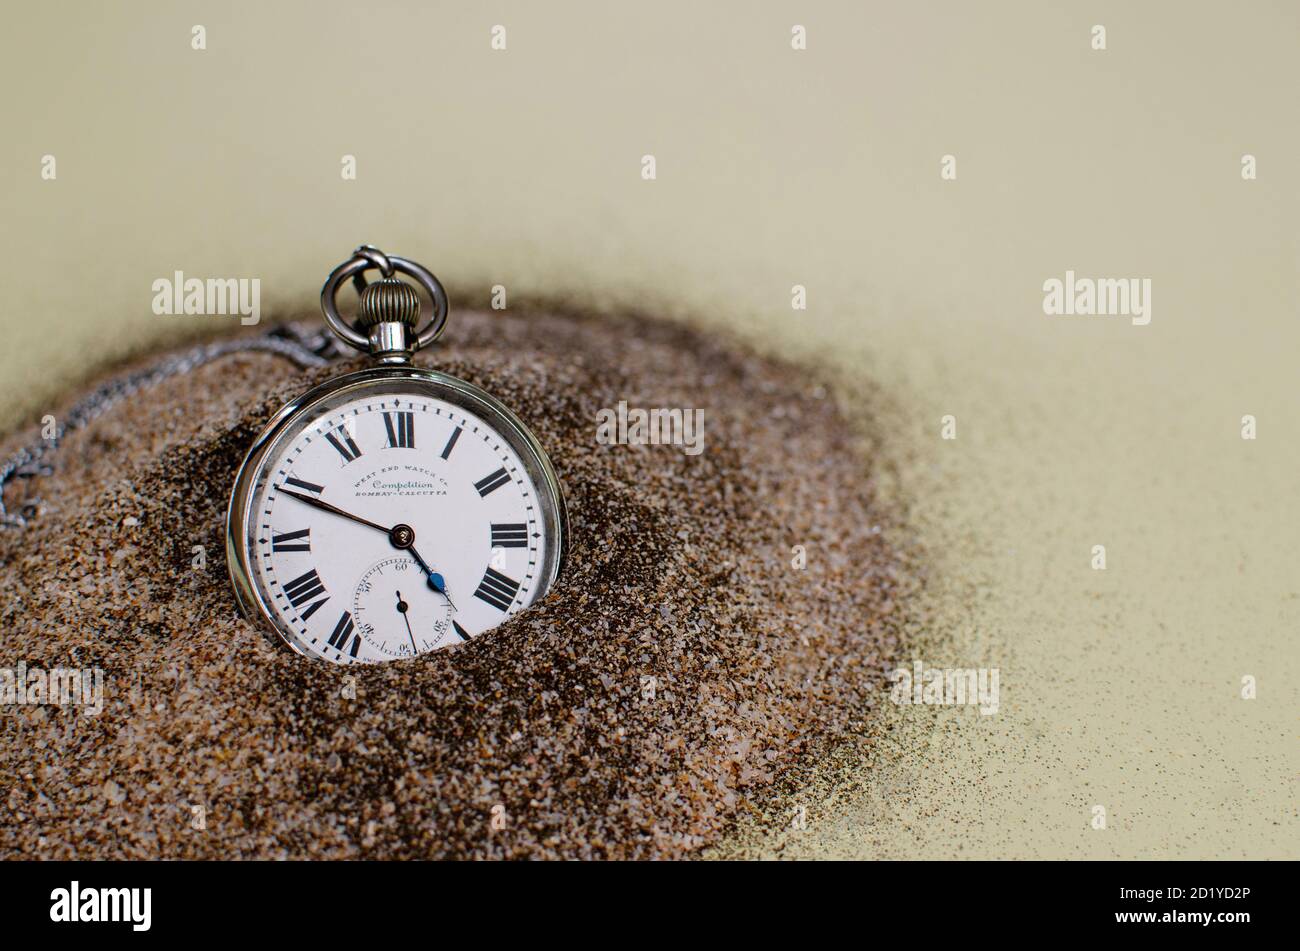 Old pocket watch against black cushion and grey textured background.  Roman nos indicating time Stock Photo